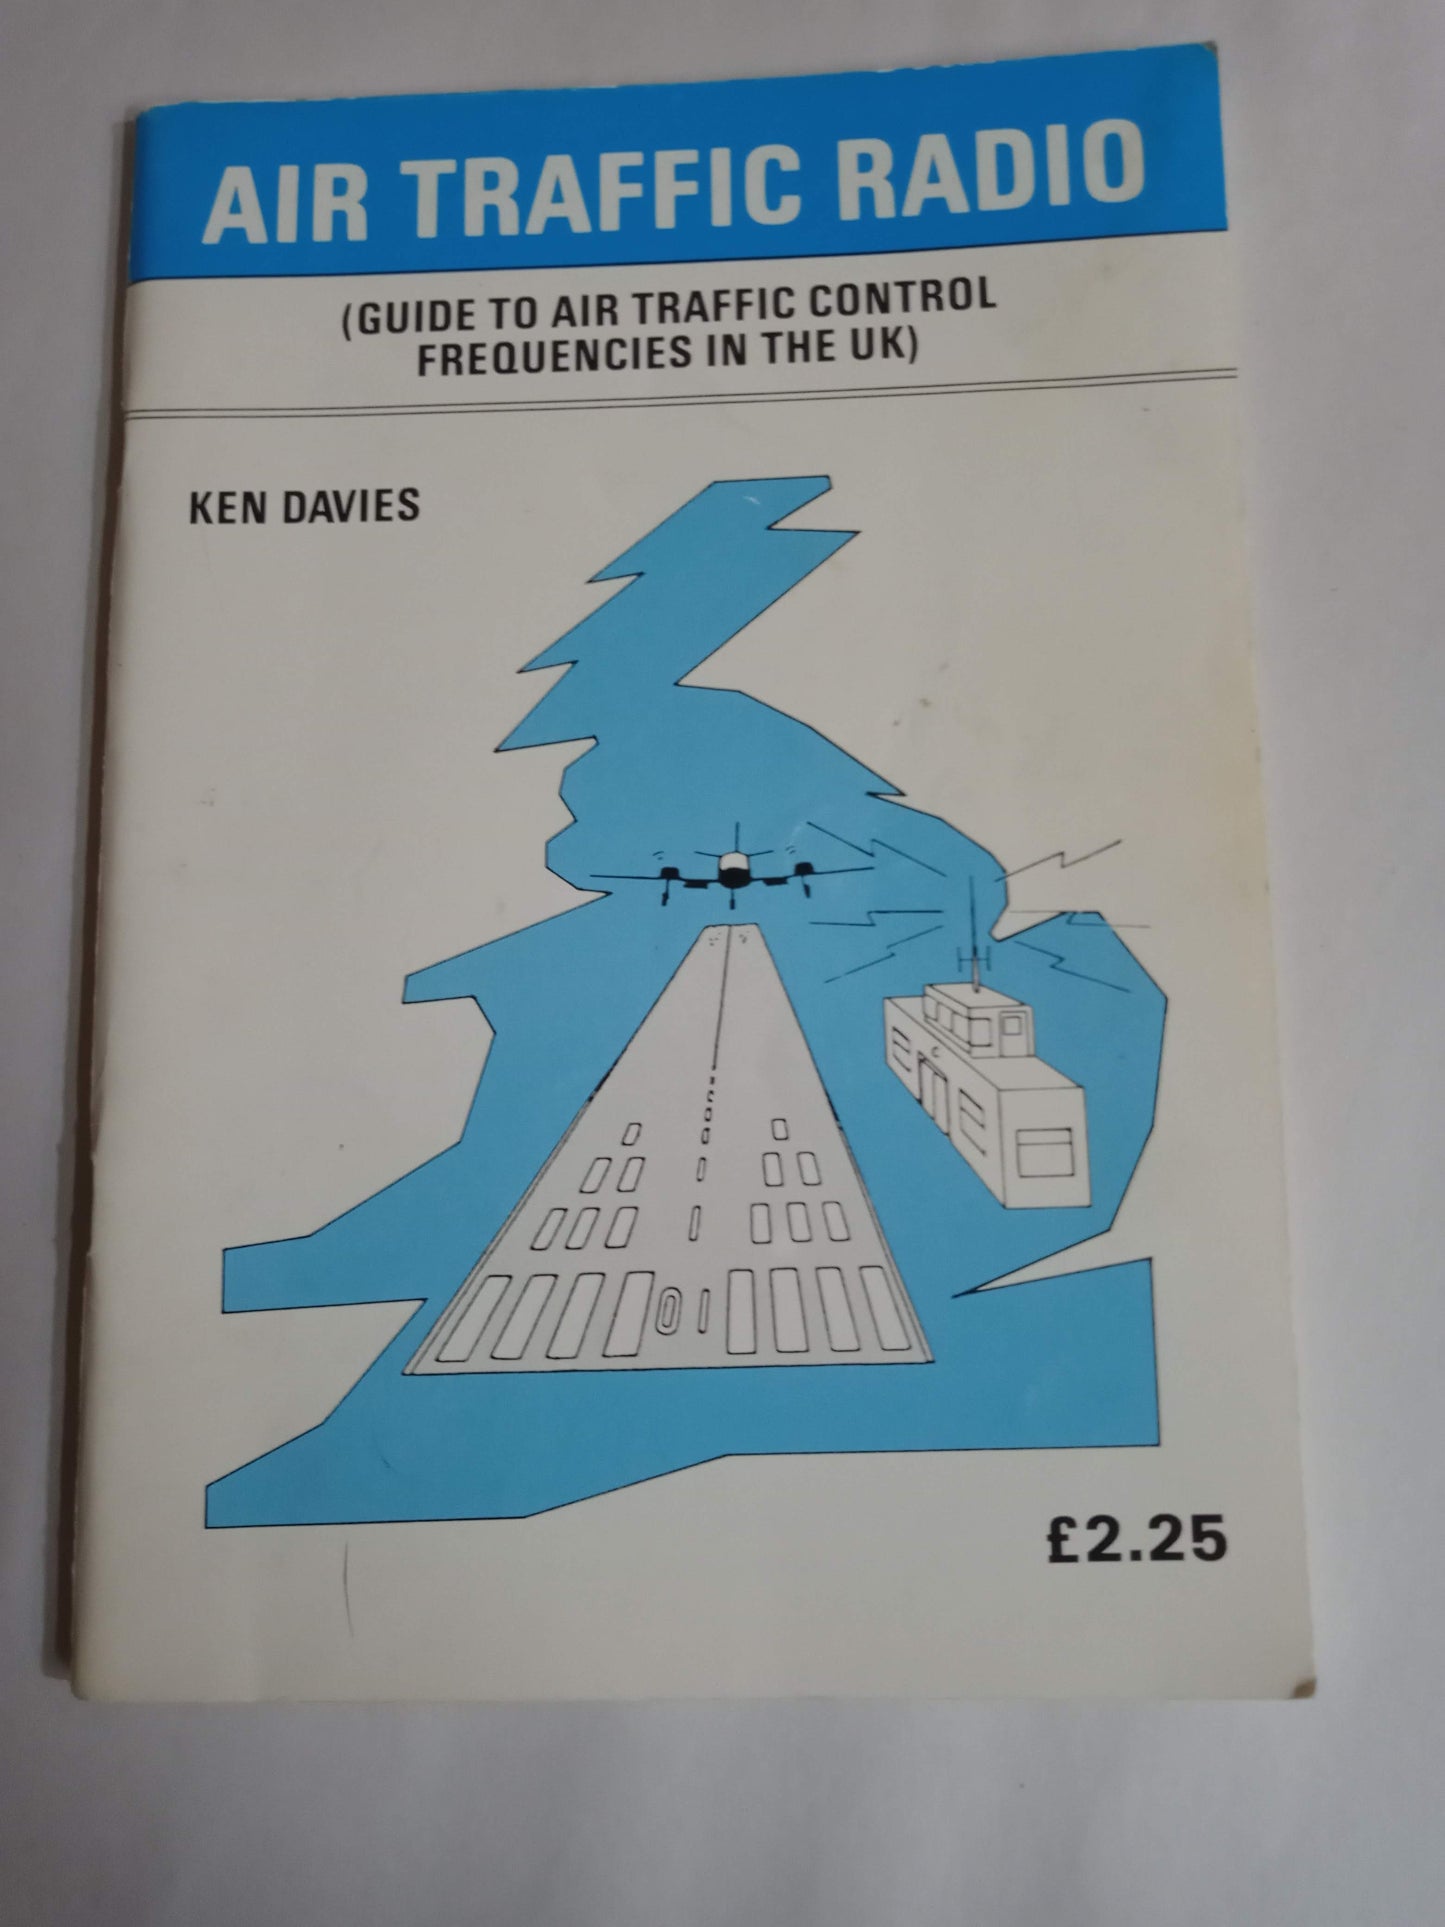 Air Traffic Radio (Guide To Air Traffic Control Frequences In The Uk